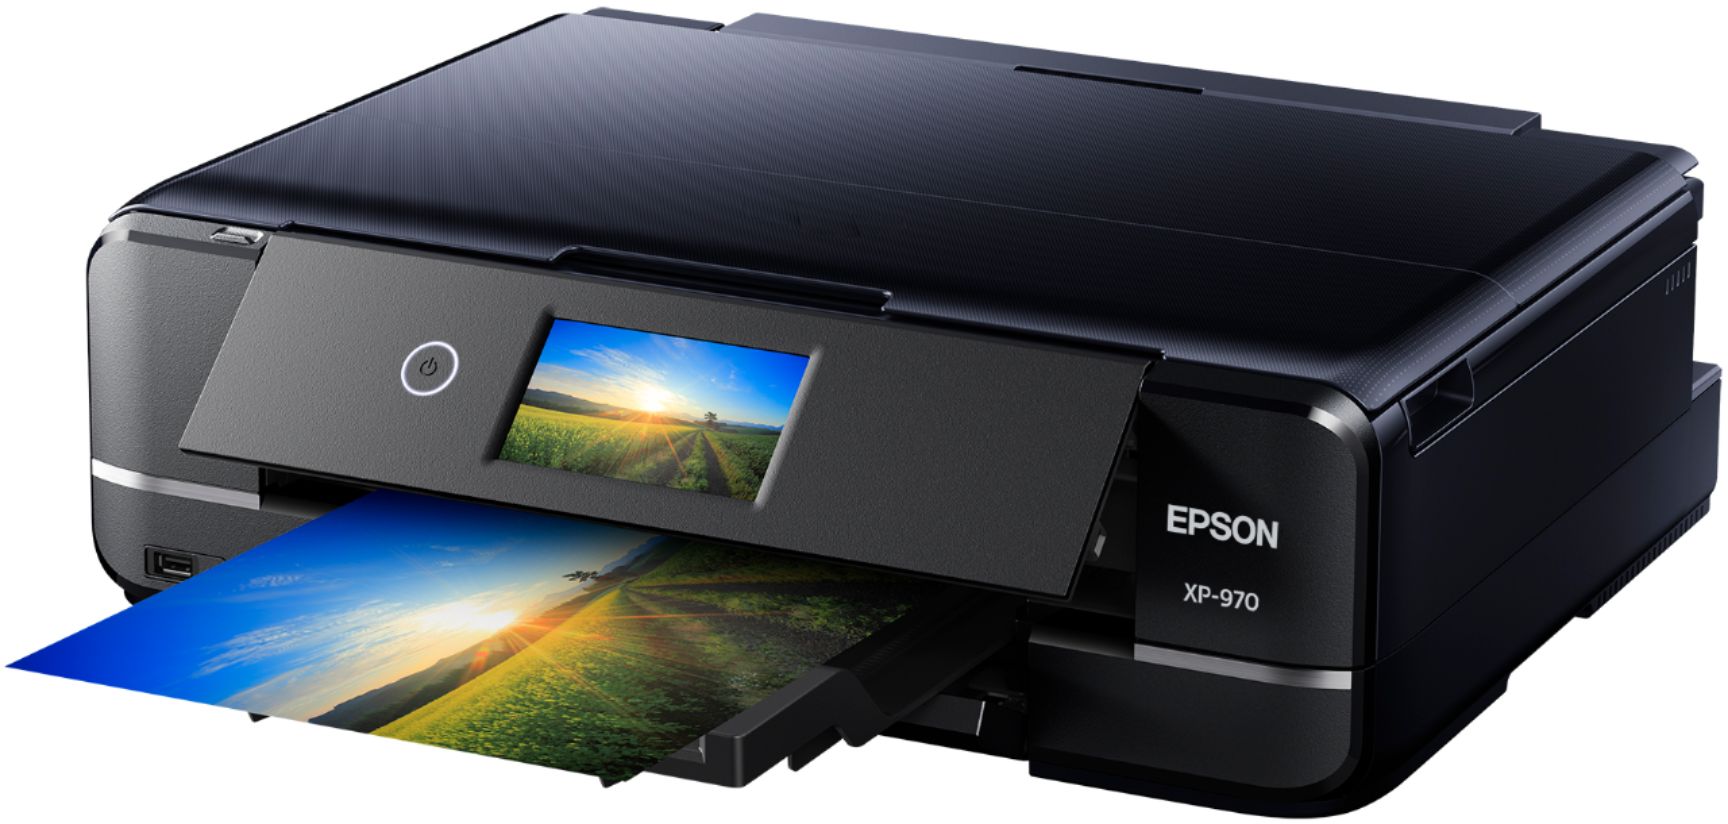  Epson  Expression Photo XP 970  Wireless All In One Printer 